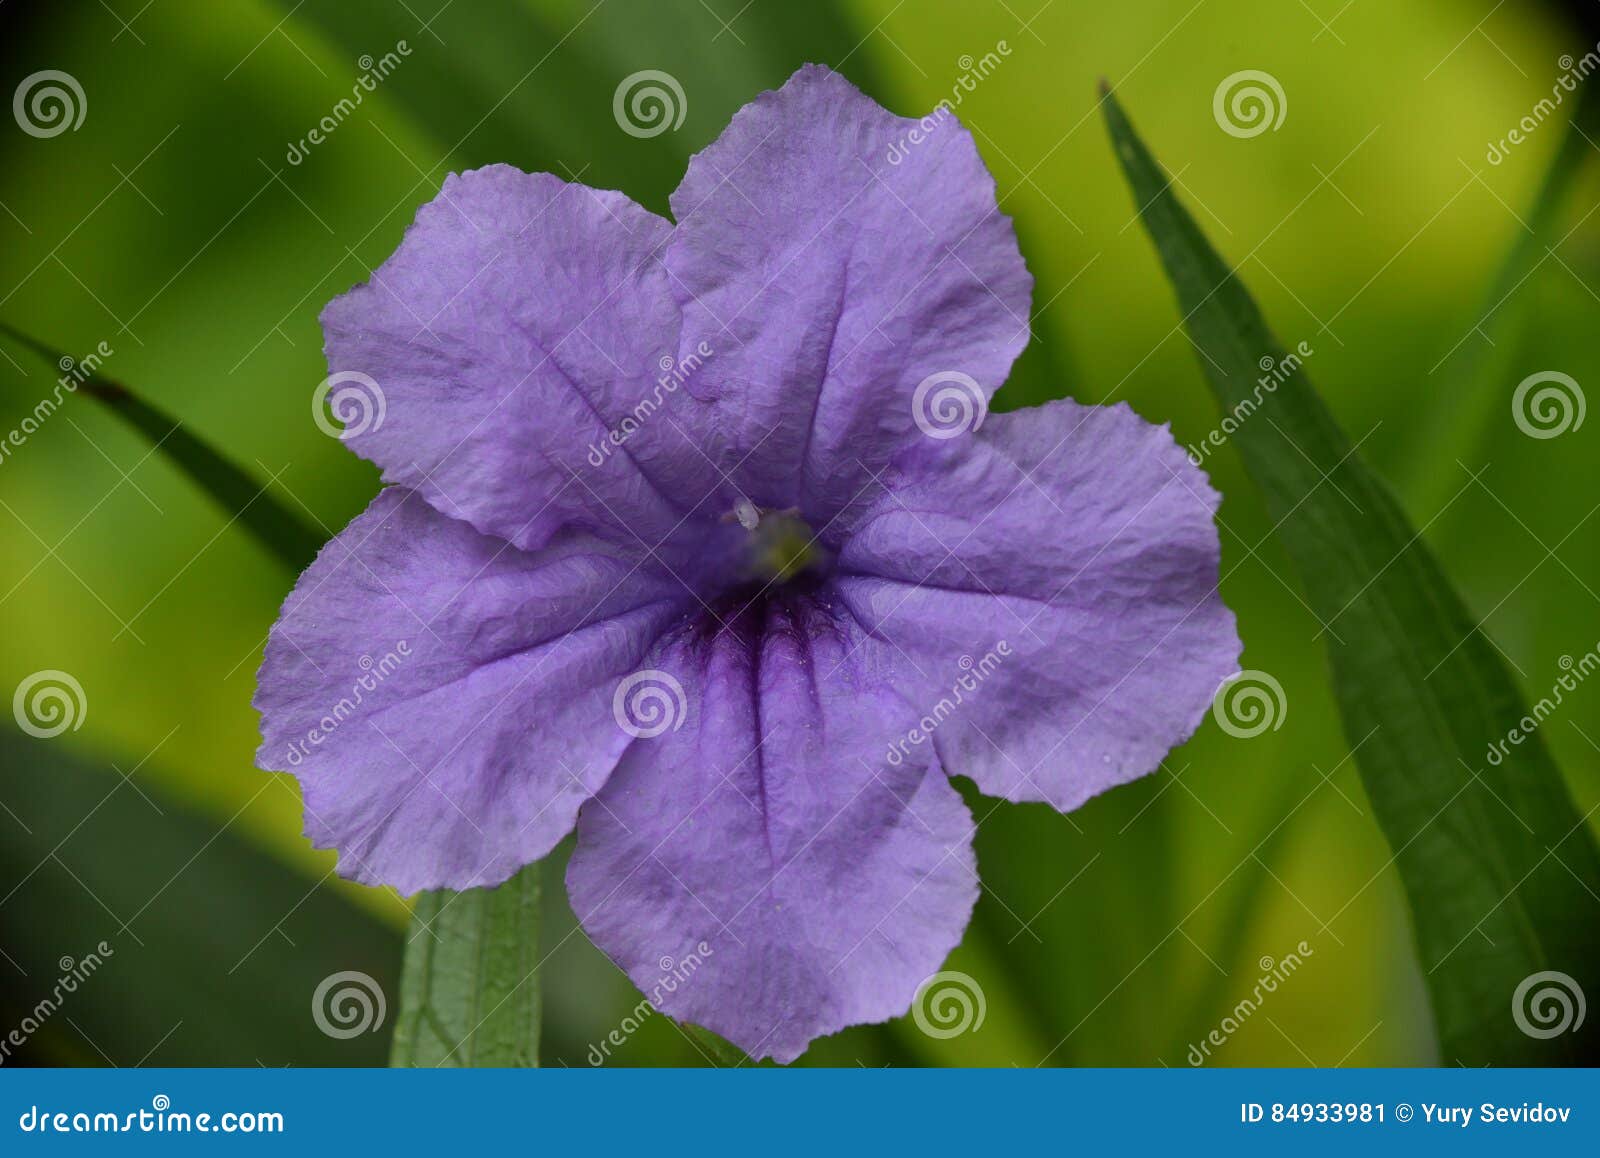 Tropical Flowers In Bali Indonesia Stock Image Image Of Bali Flowers 84933981